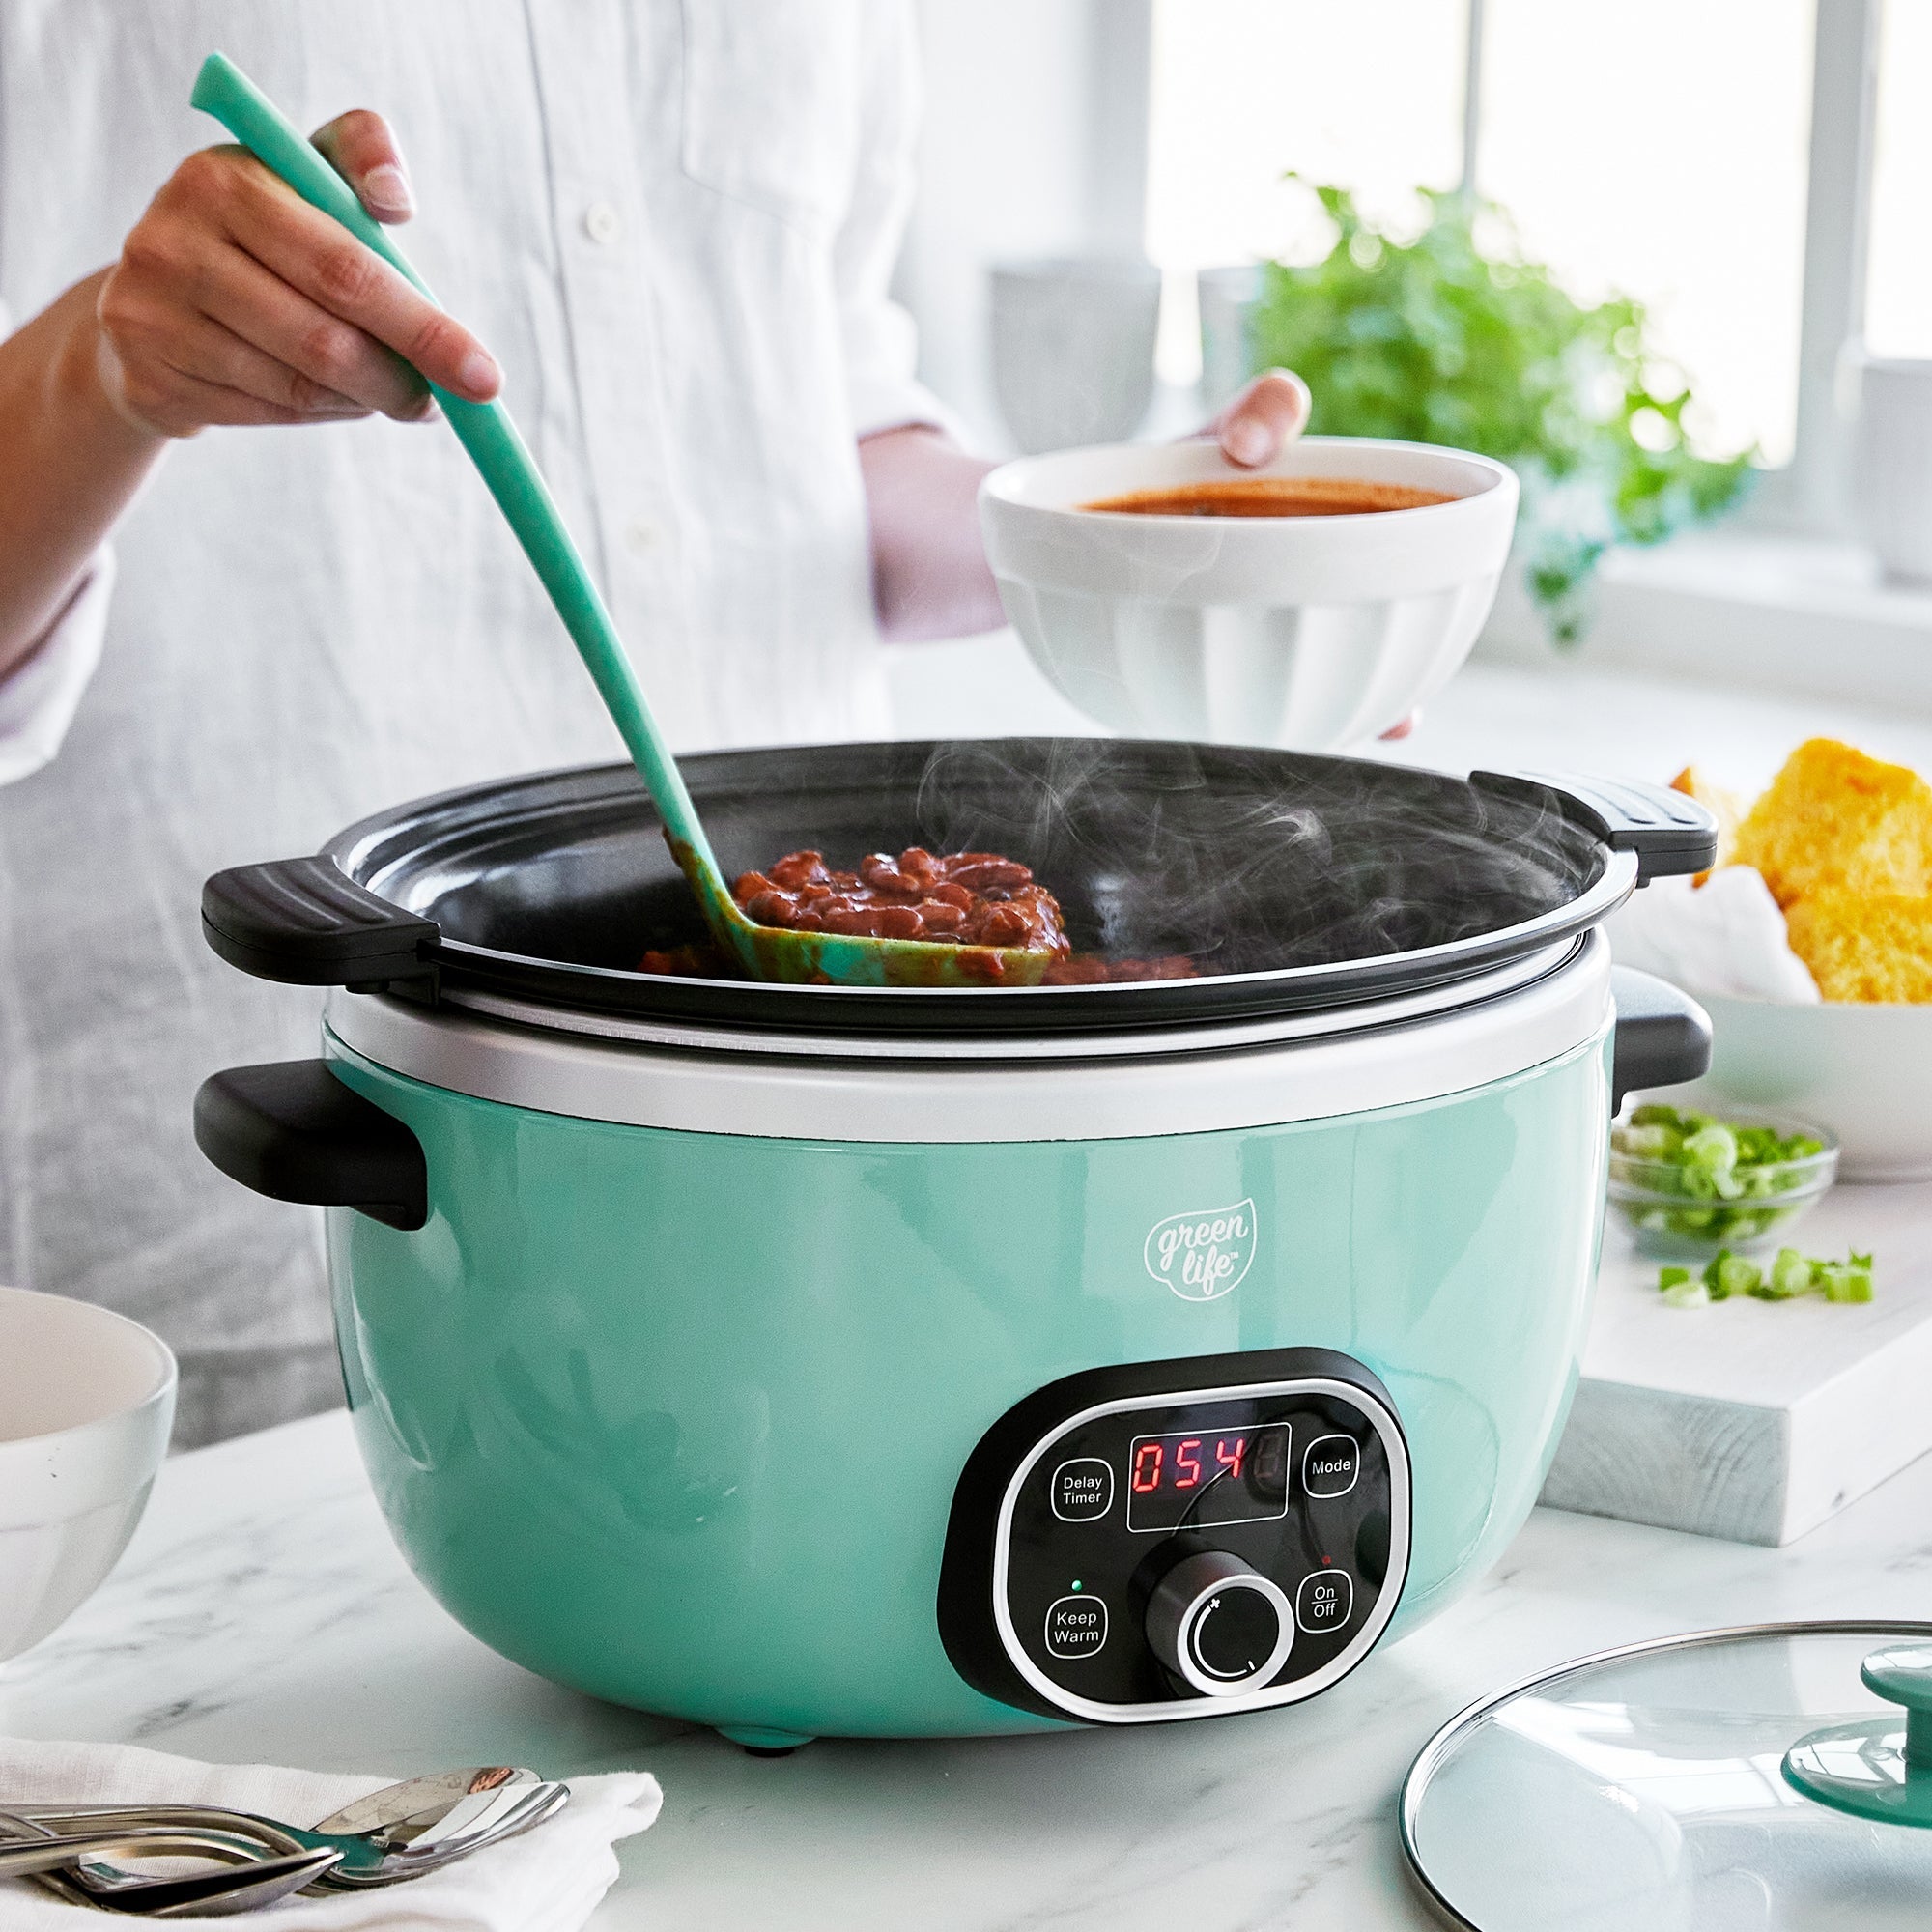 GreenLife  Go Grains Rice Cooker